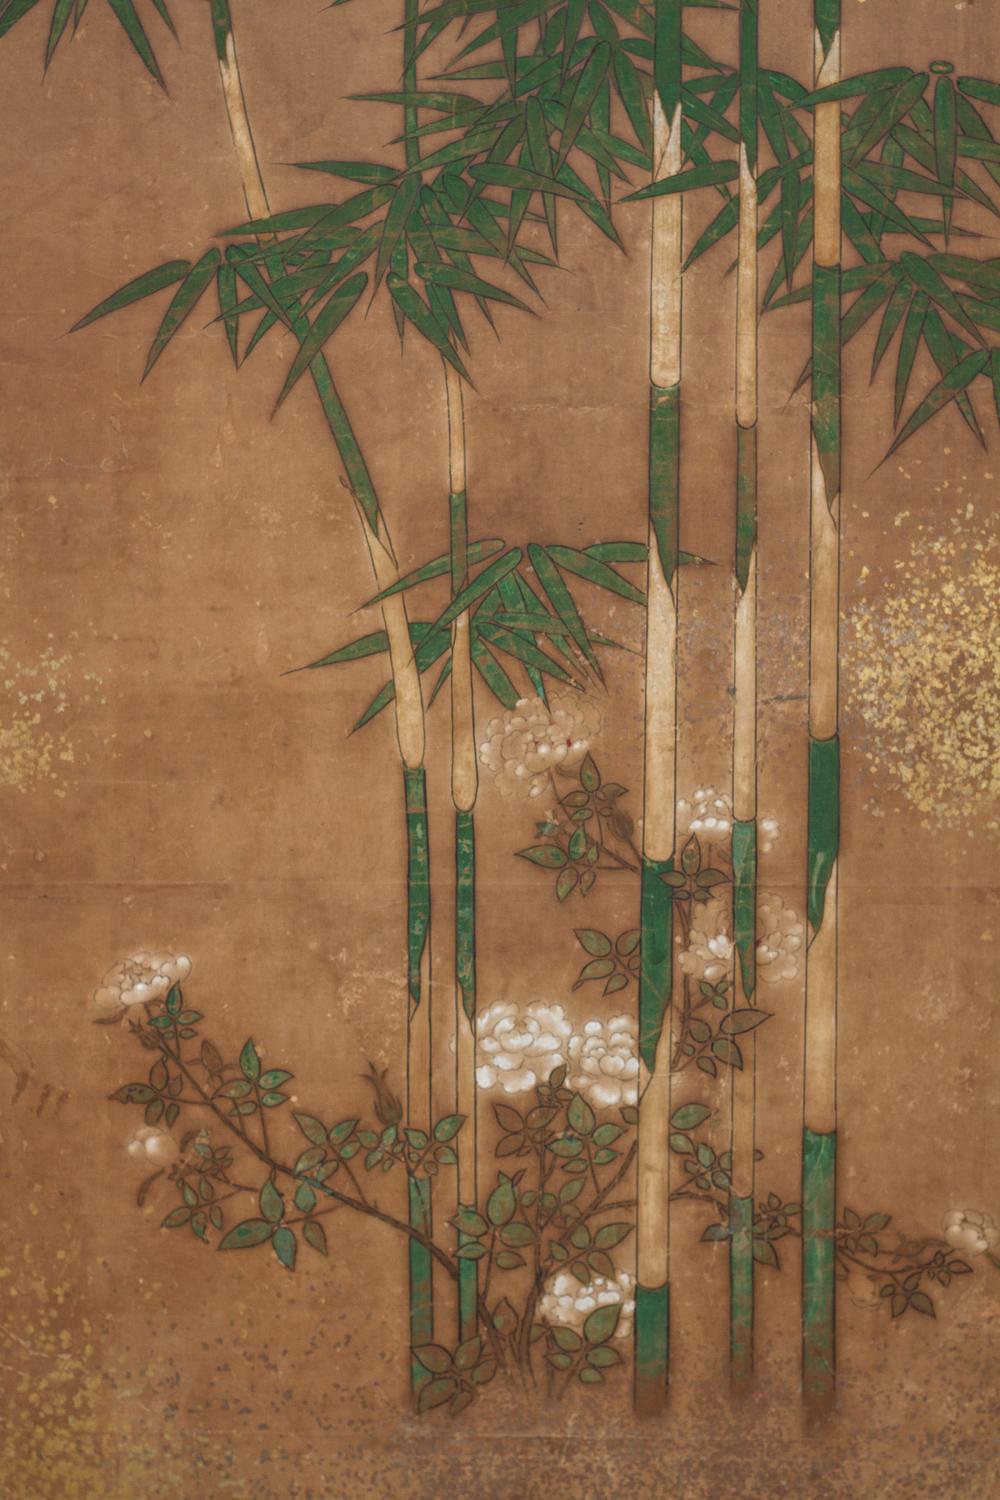 Kano School painting of a bamboo grove with blooming flowers and gold dust mists. Painted in mineral pigments on mulberry paper with gold dust and a silk brocade border.